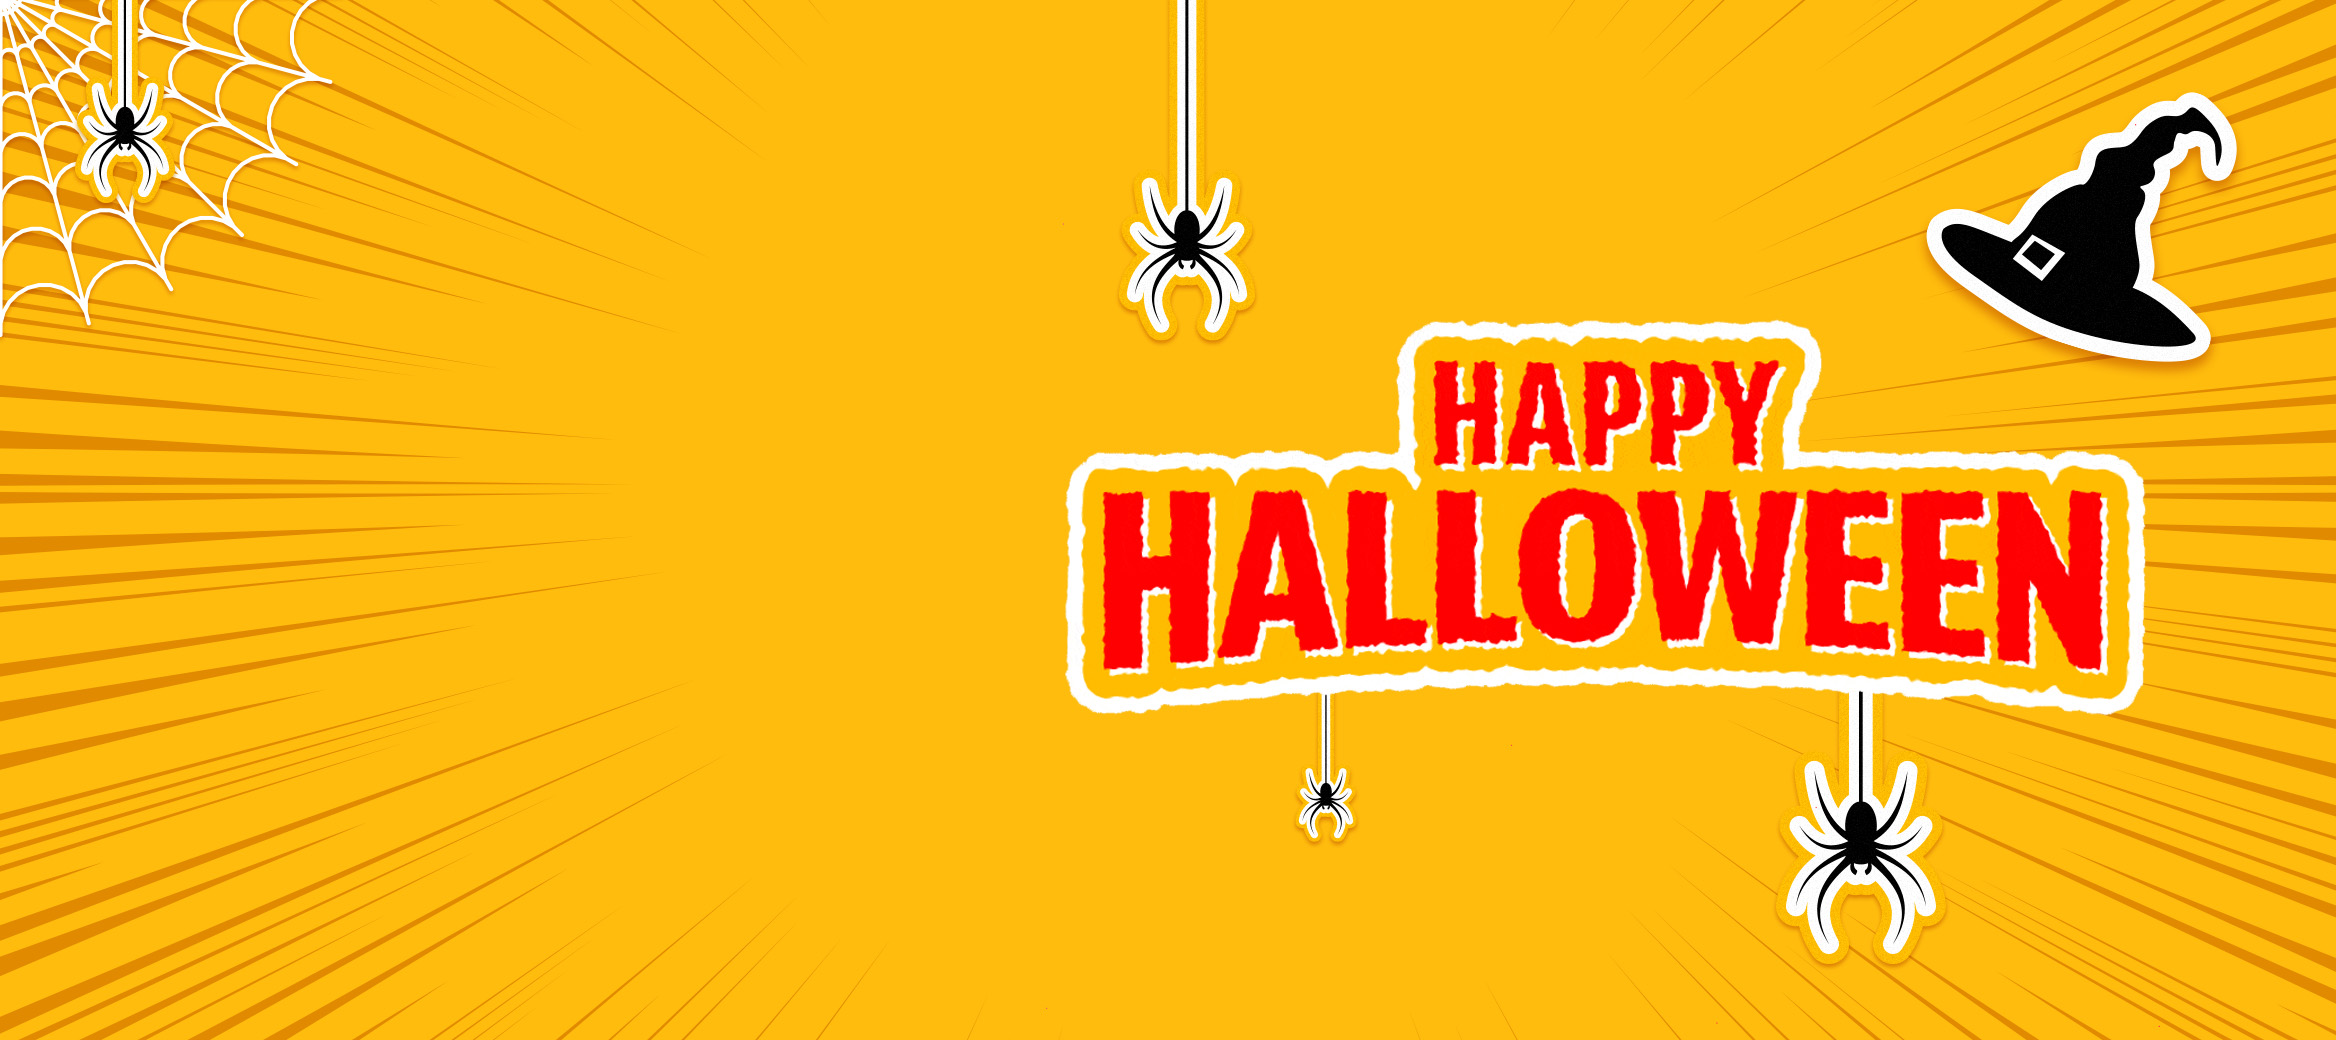 Yellow Halloween themed banner with spiders, spider webs and a witch hat.